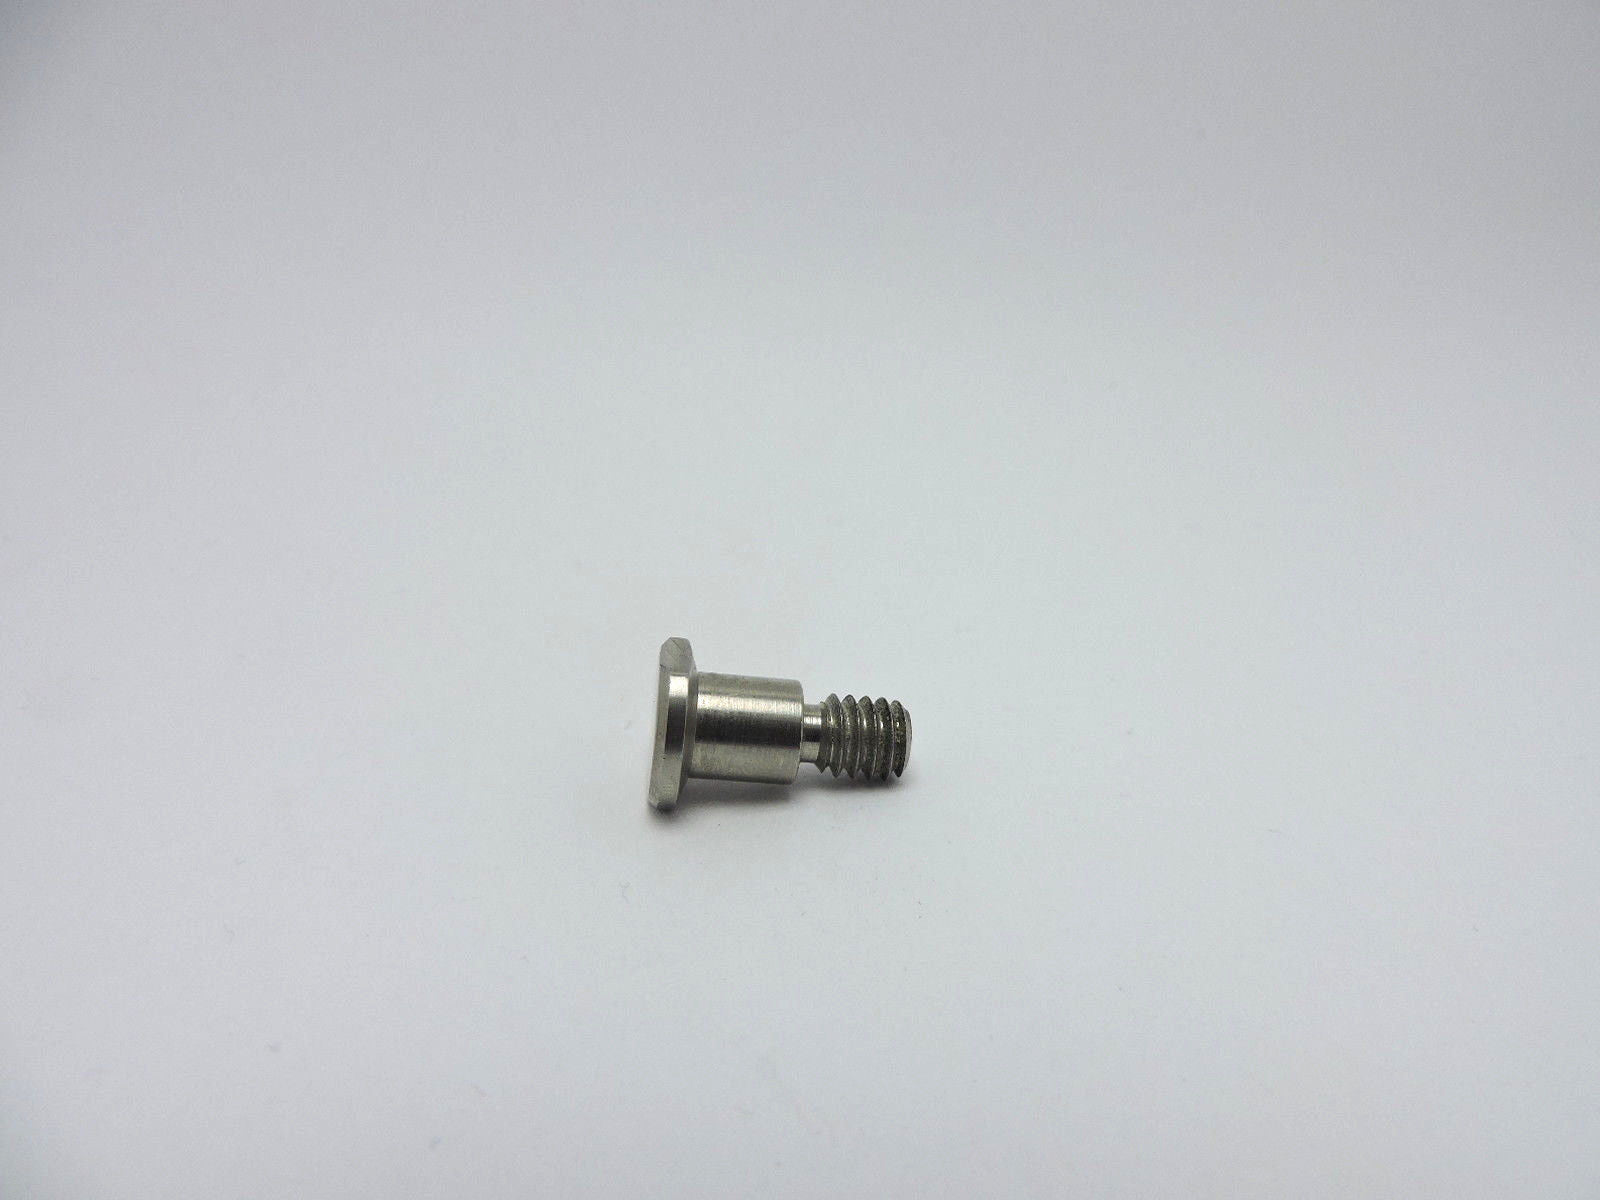 Post Center Plate - Berkel OEM Part # 3375-01073 - Available from City Food Equipment